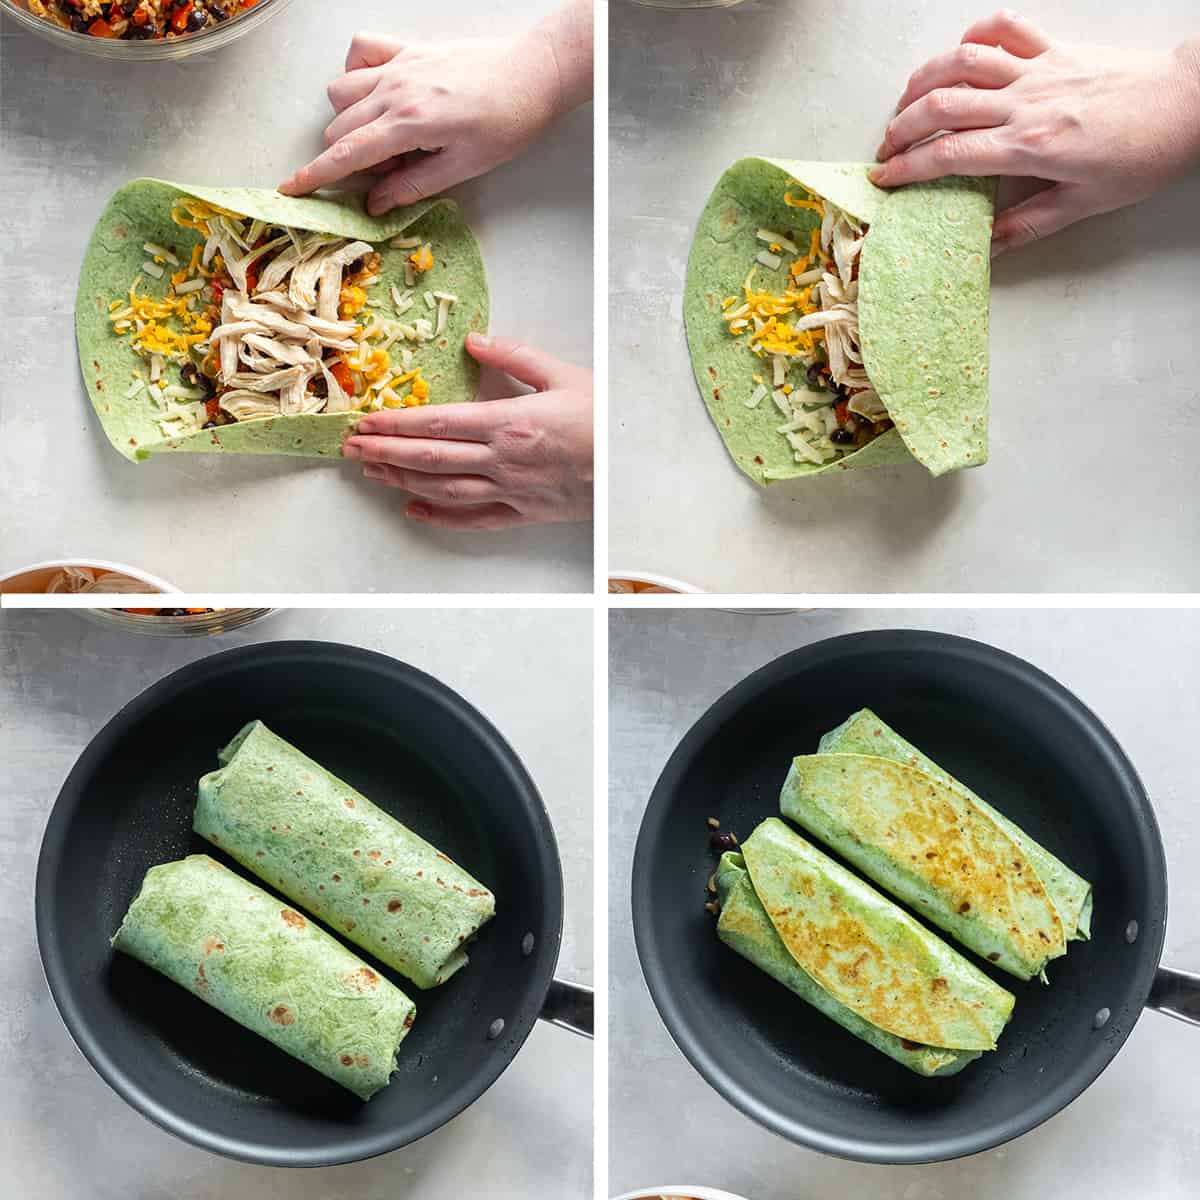 Four images showing hands folding burritos and the burritos cooking in a skillet.